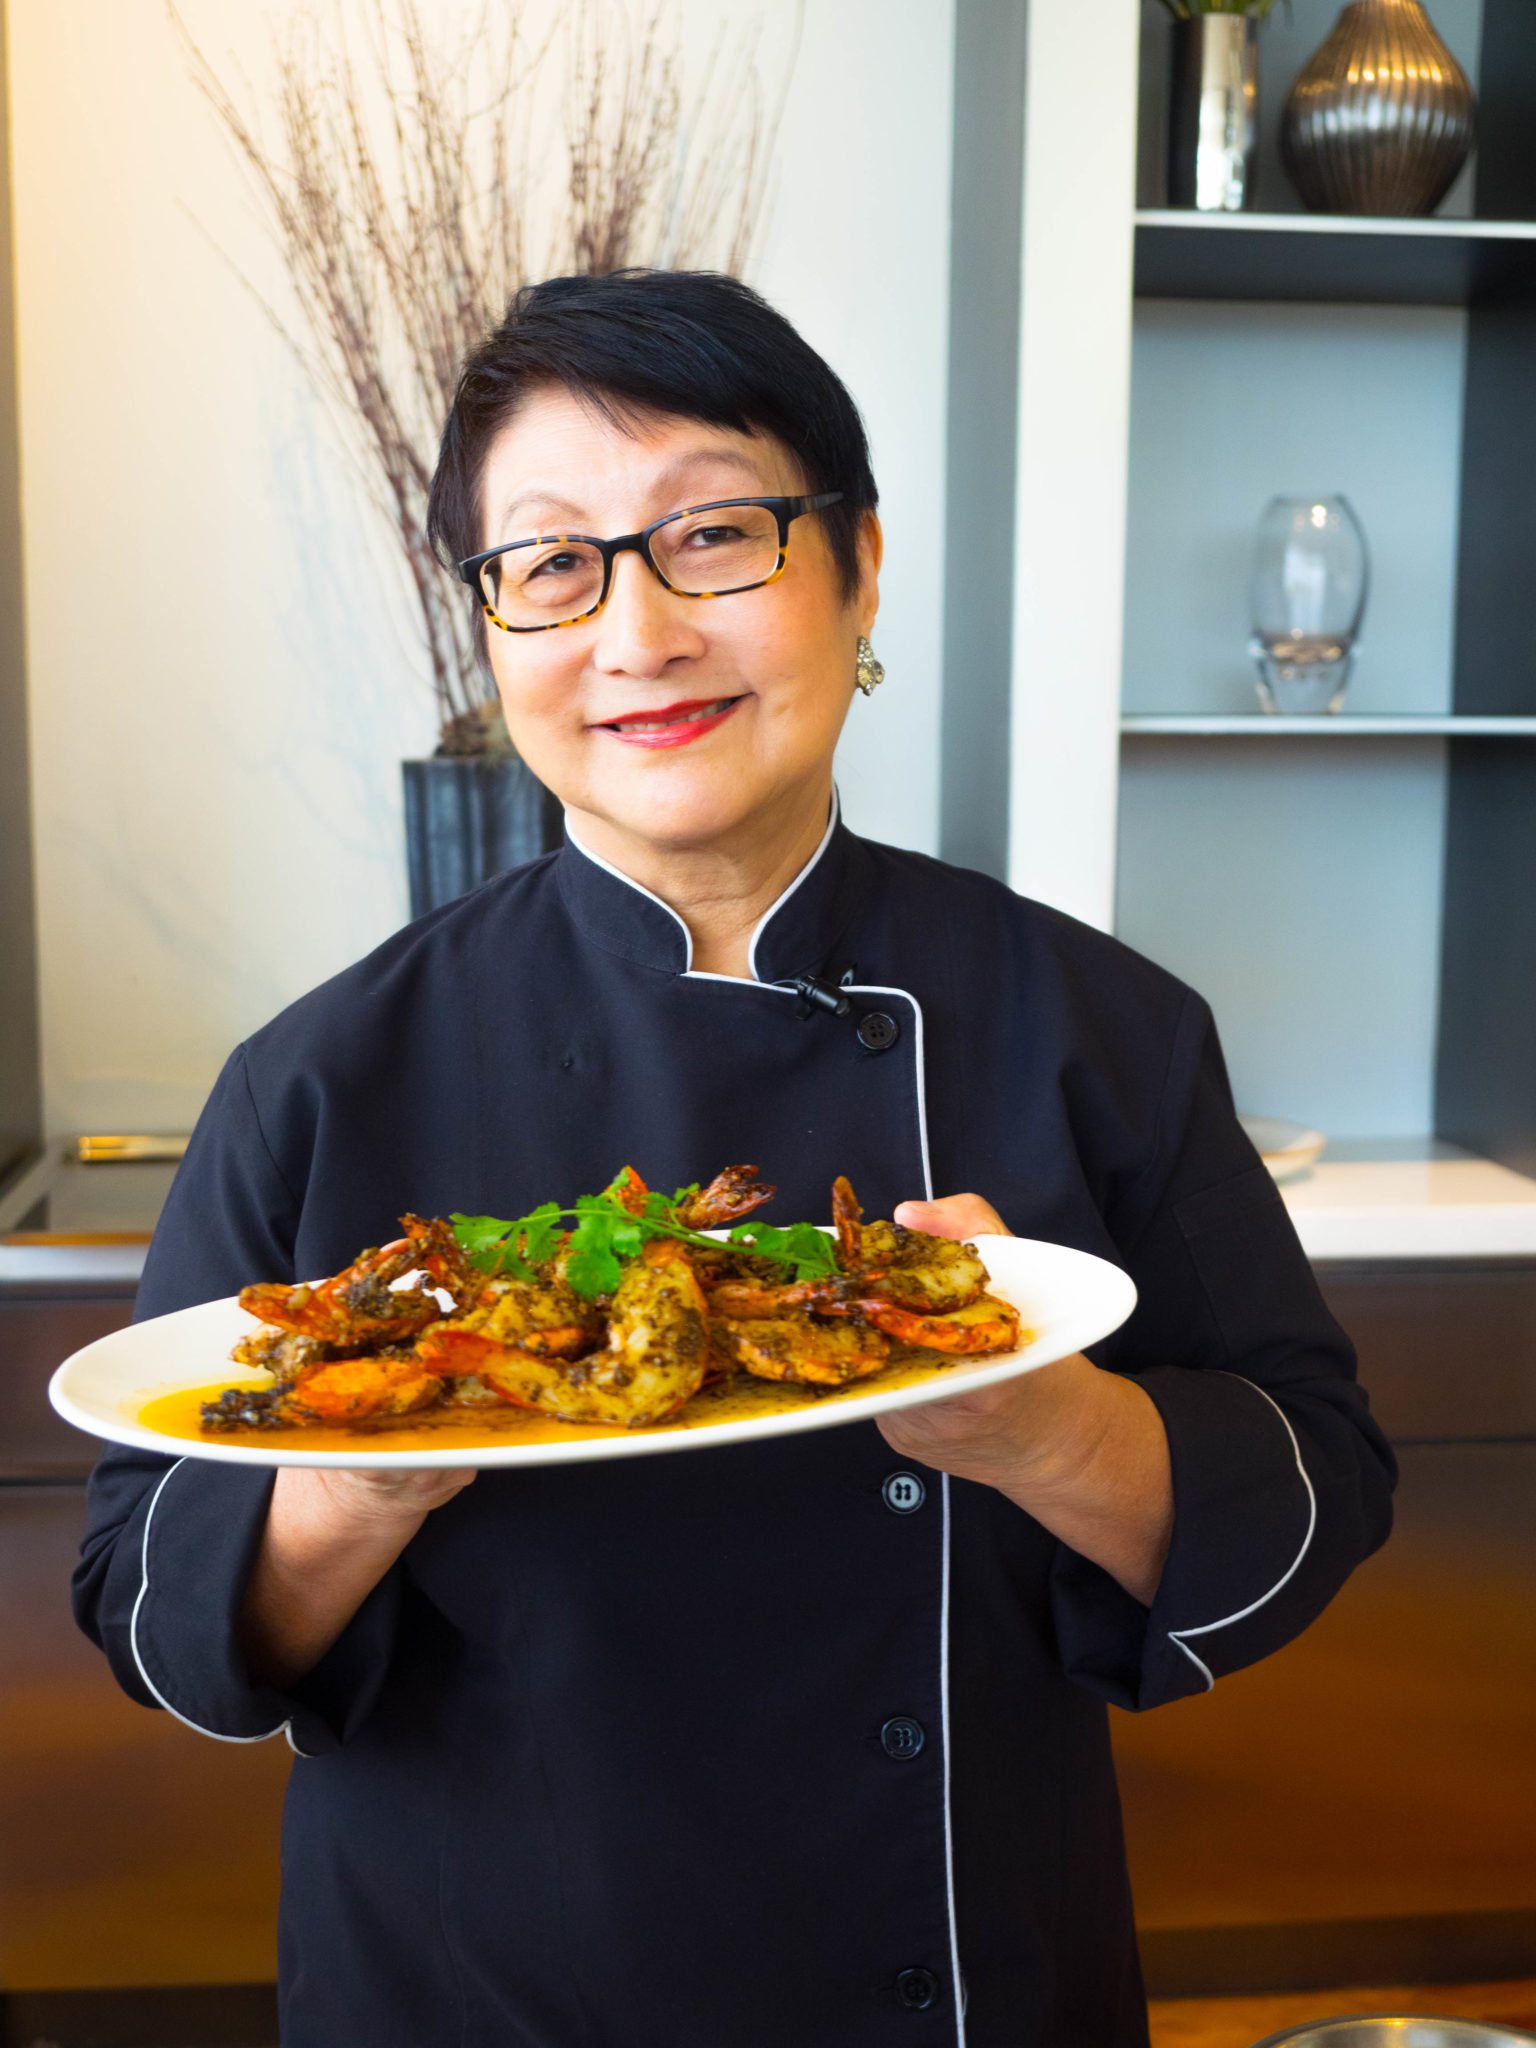 A special cooking class with chef Violet Oon as part of your hotel's amenities? Sign us up